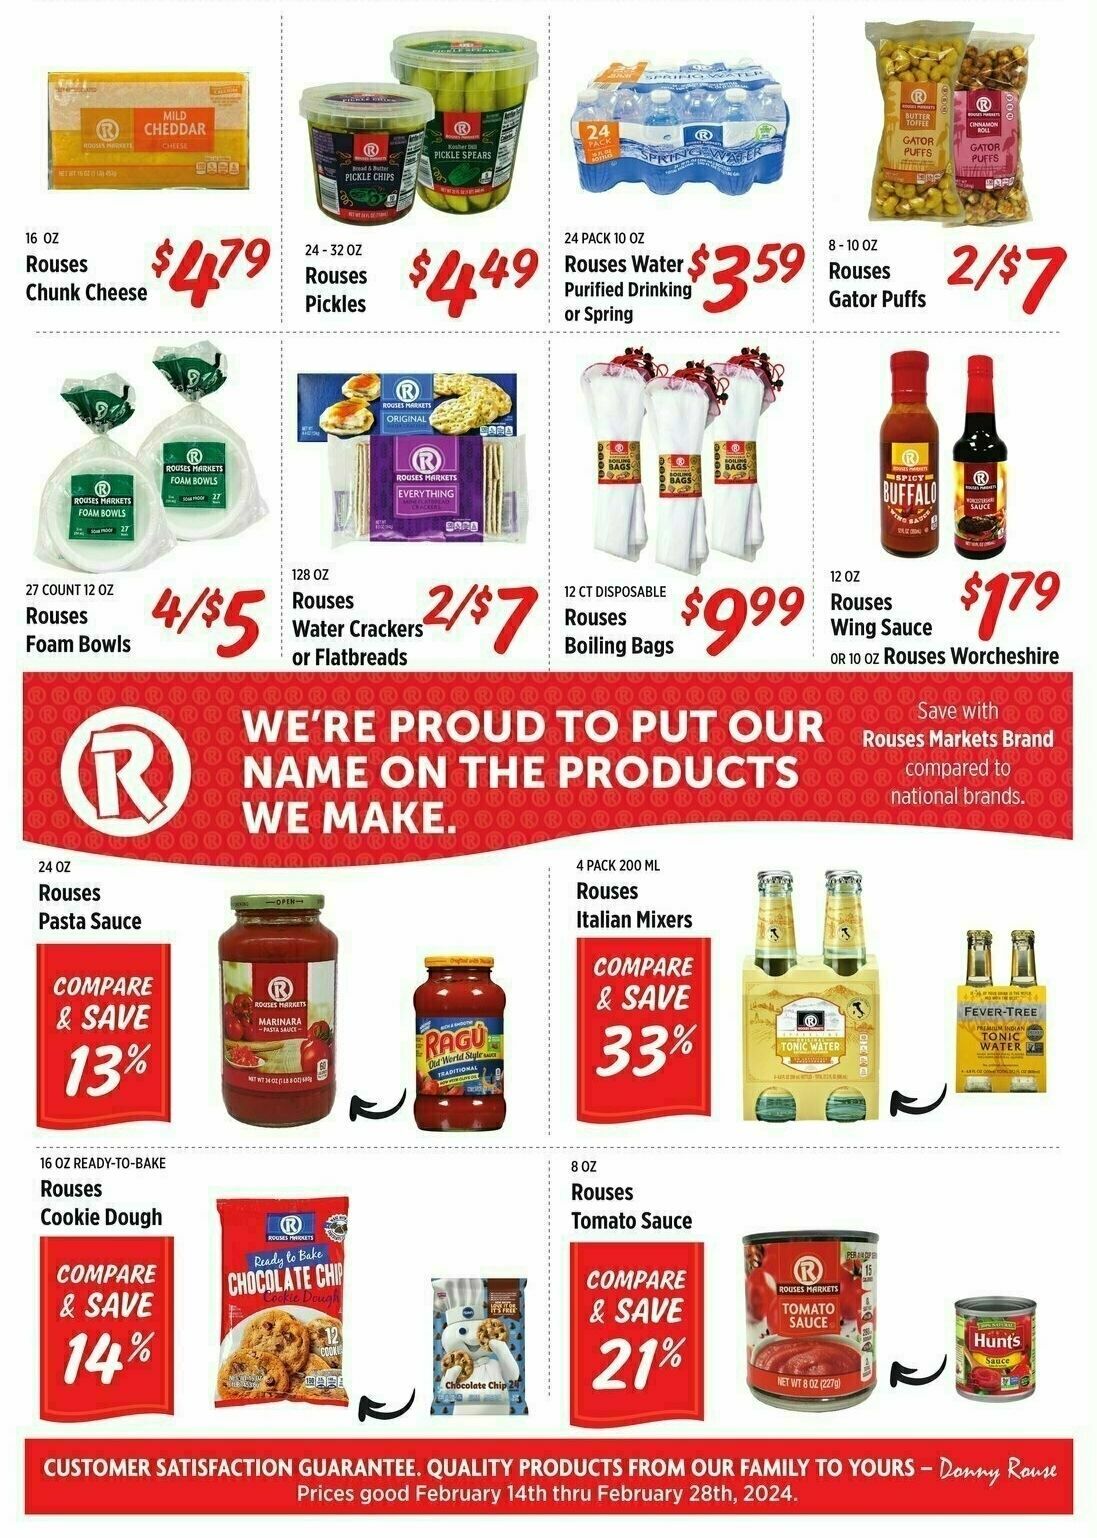 Rouses Markets Rouses Brand Weekly Ad from February 14